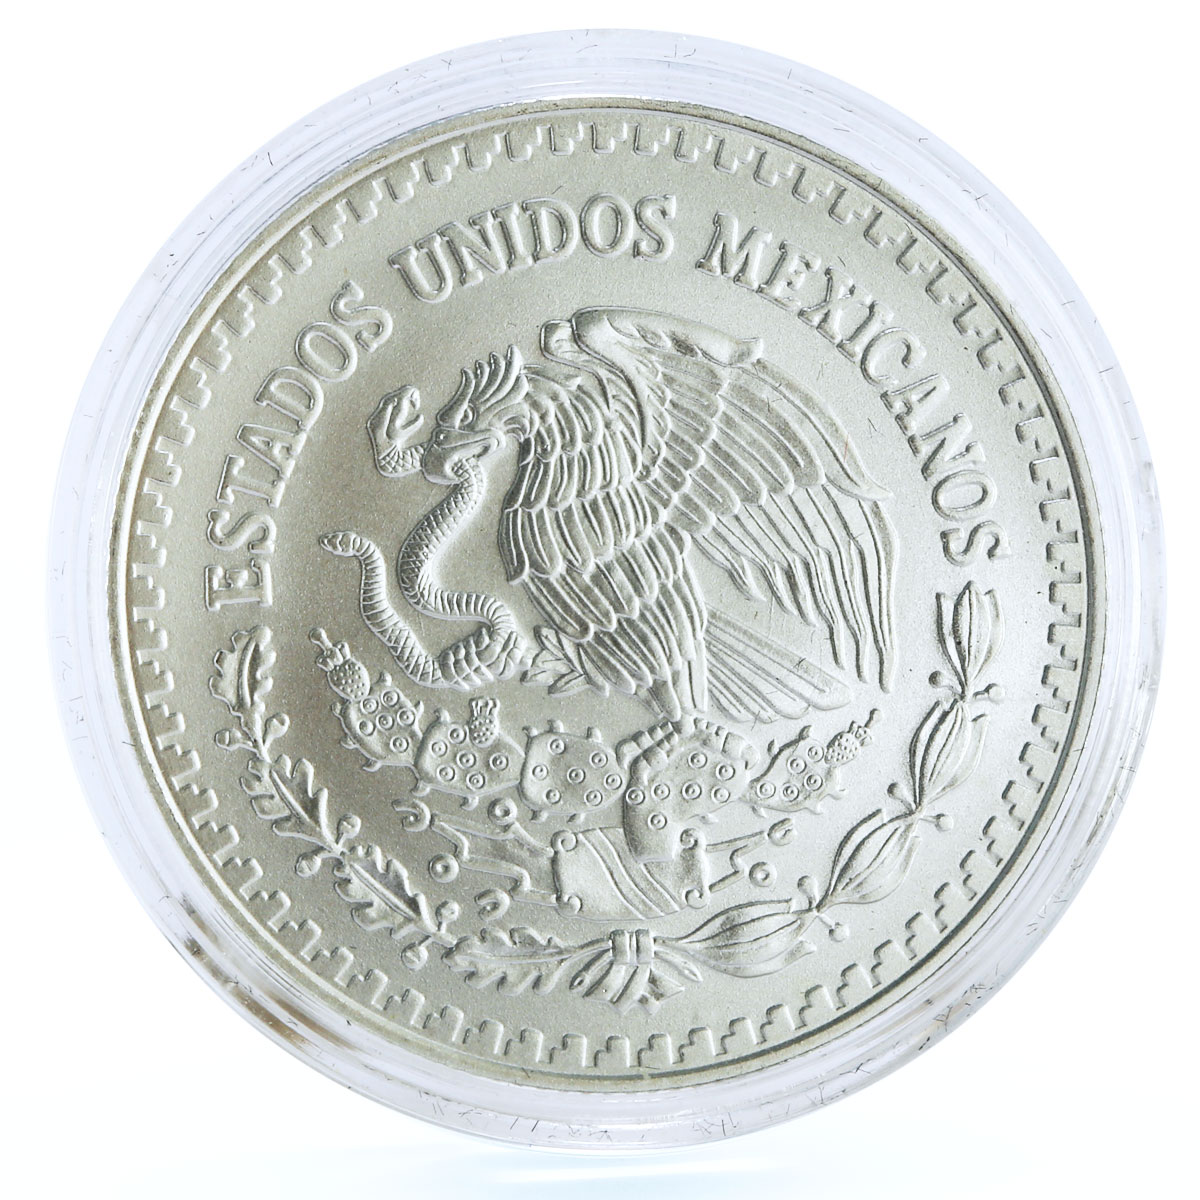 Mexico set of 2 coins 30th Anniversary of the Libertad Coinage silver coin 2012